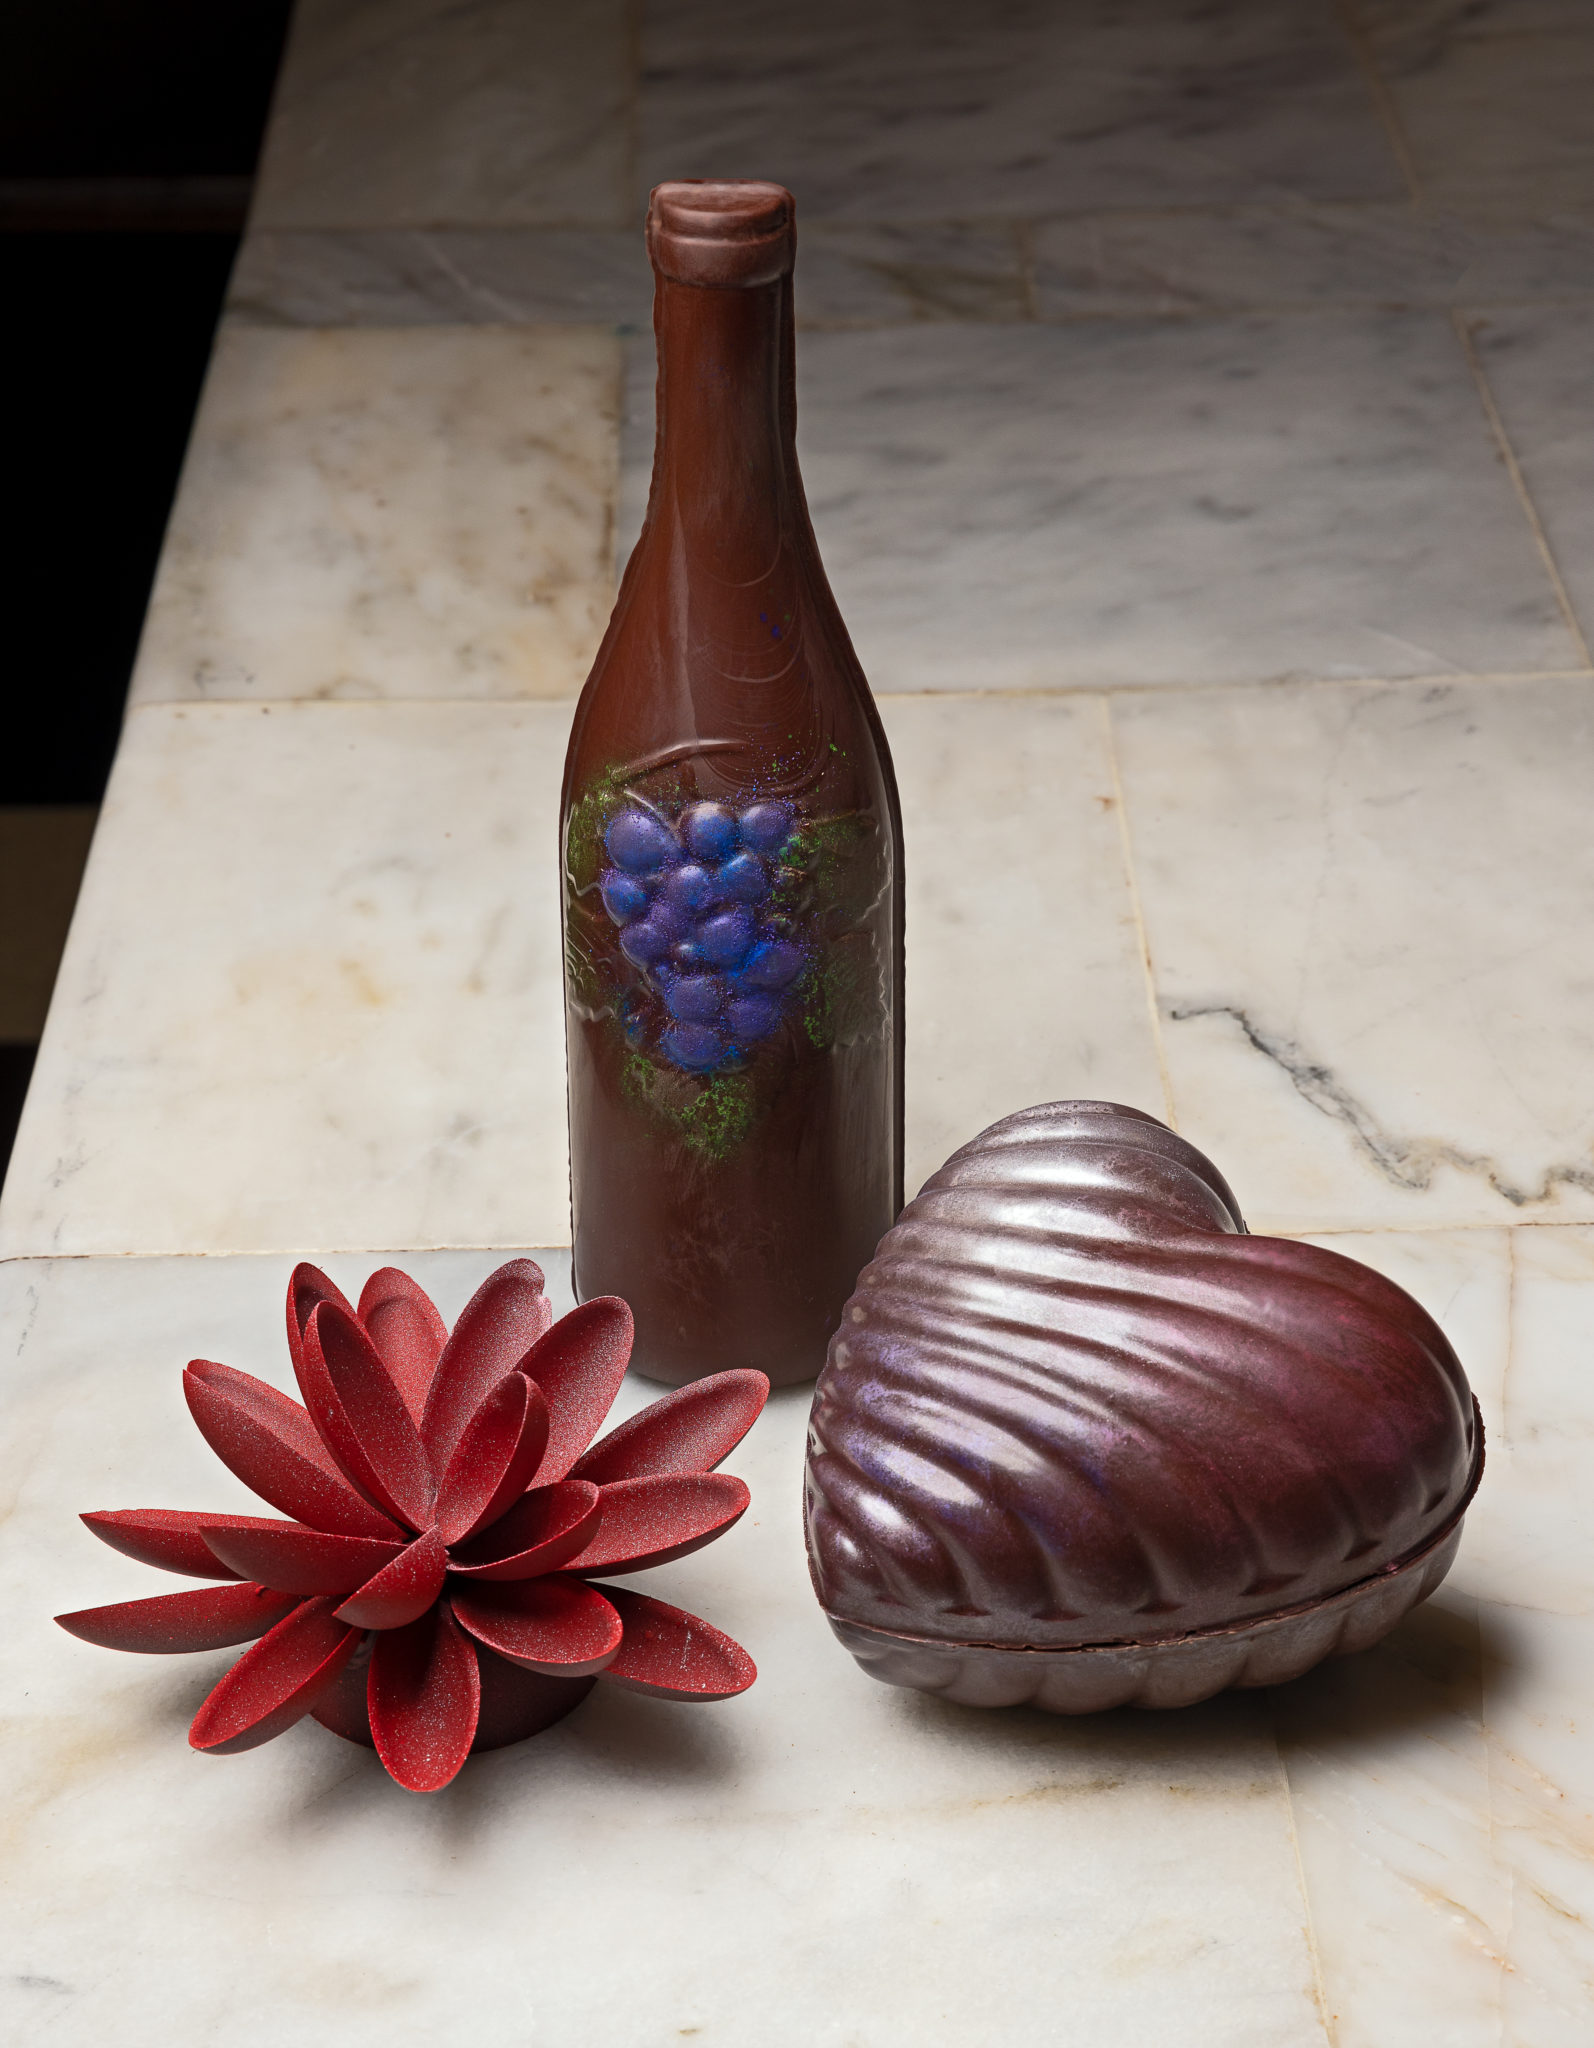 Chocolate creations from Fleur Sauvage in Windsor. (Chris Hardy/Sonoma Magazine)